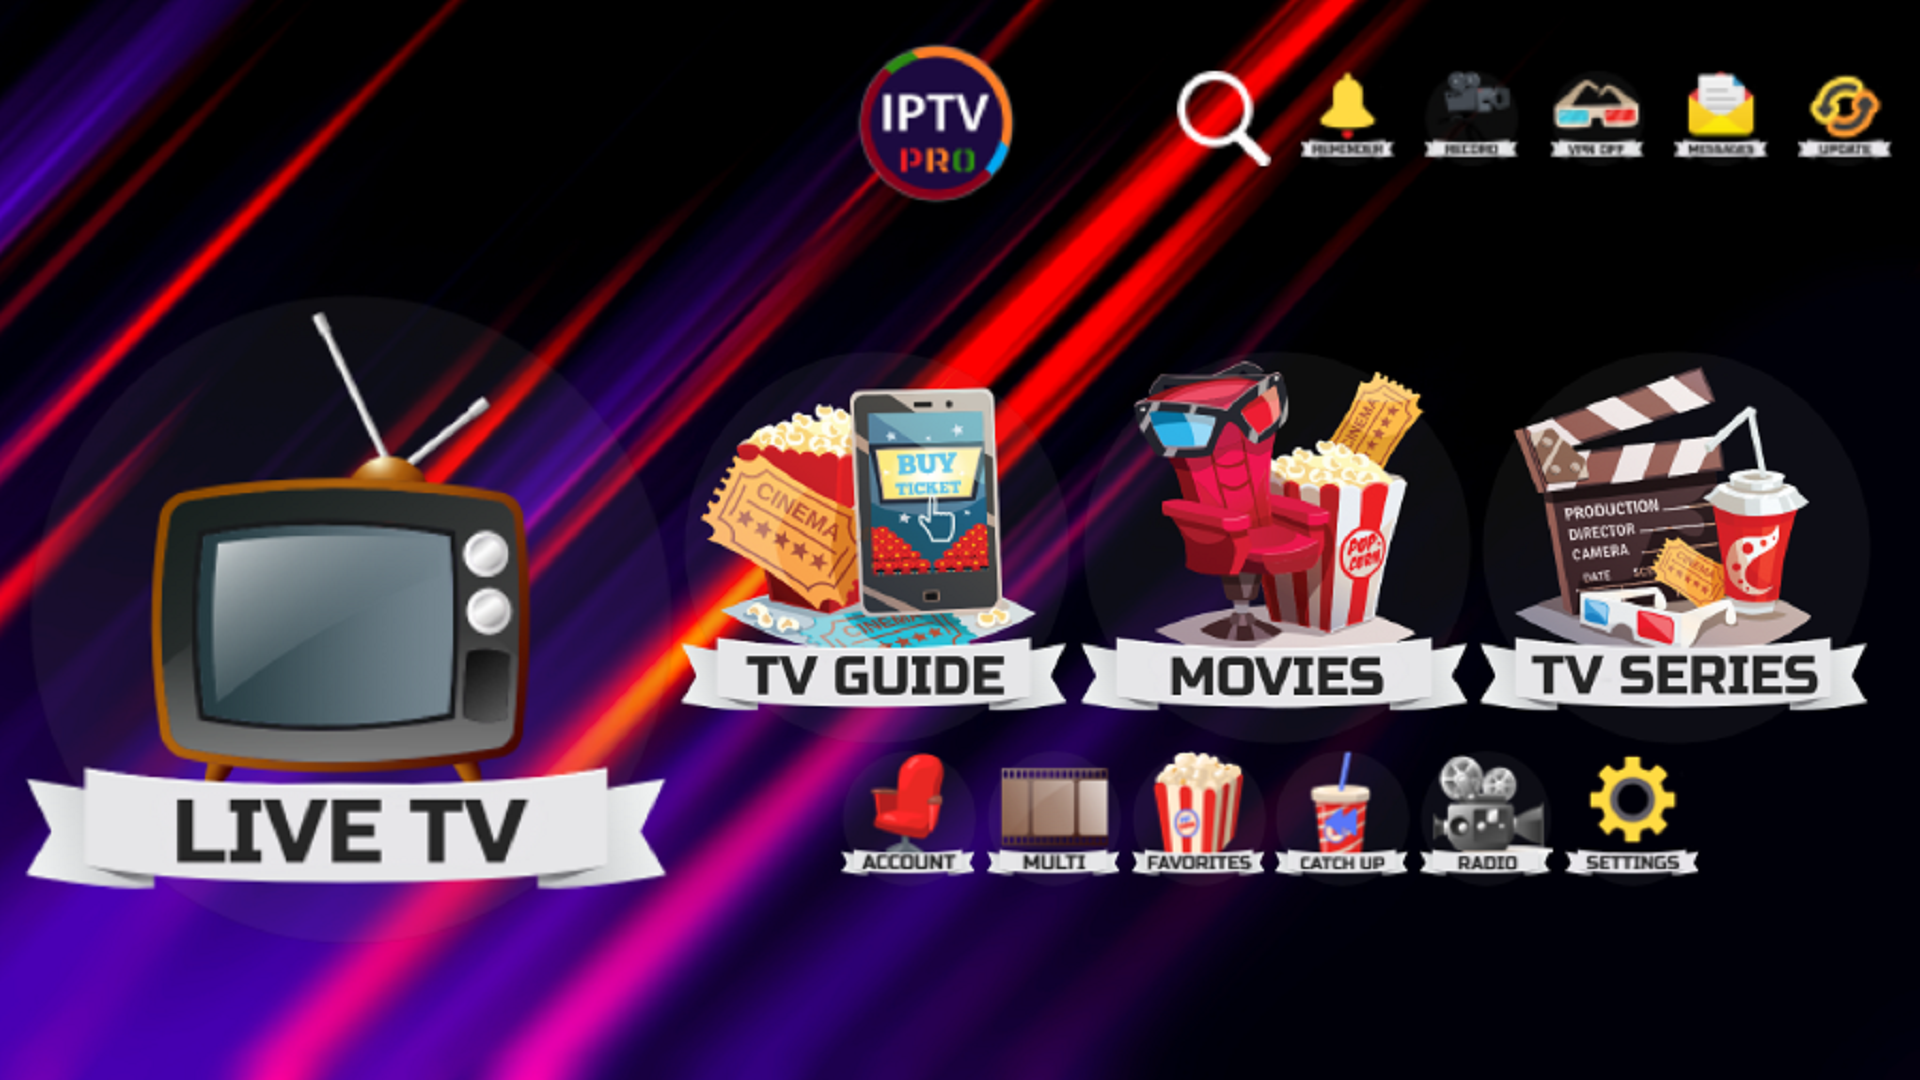 IPTV Pro APK For Android Full Version